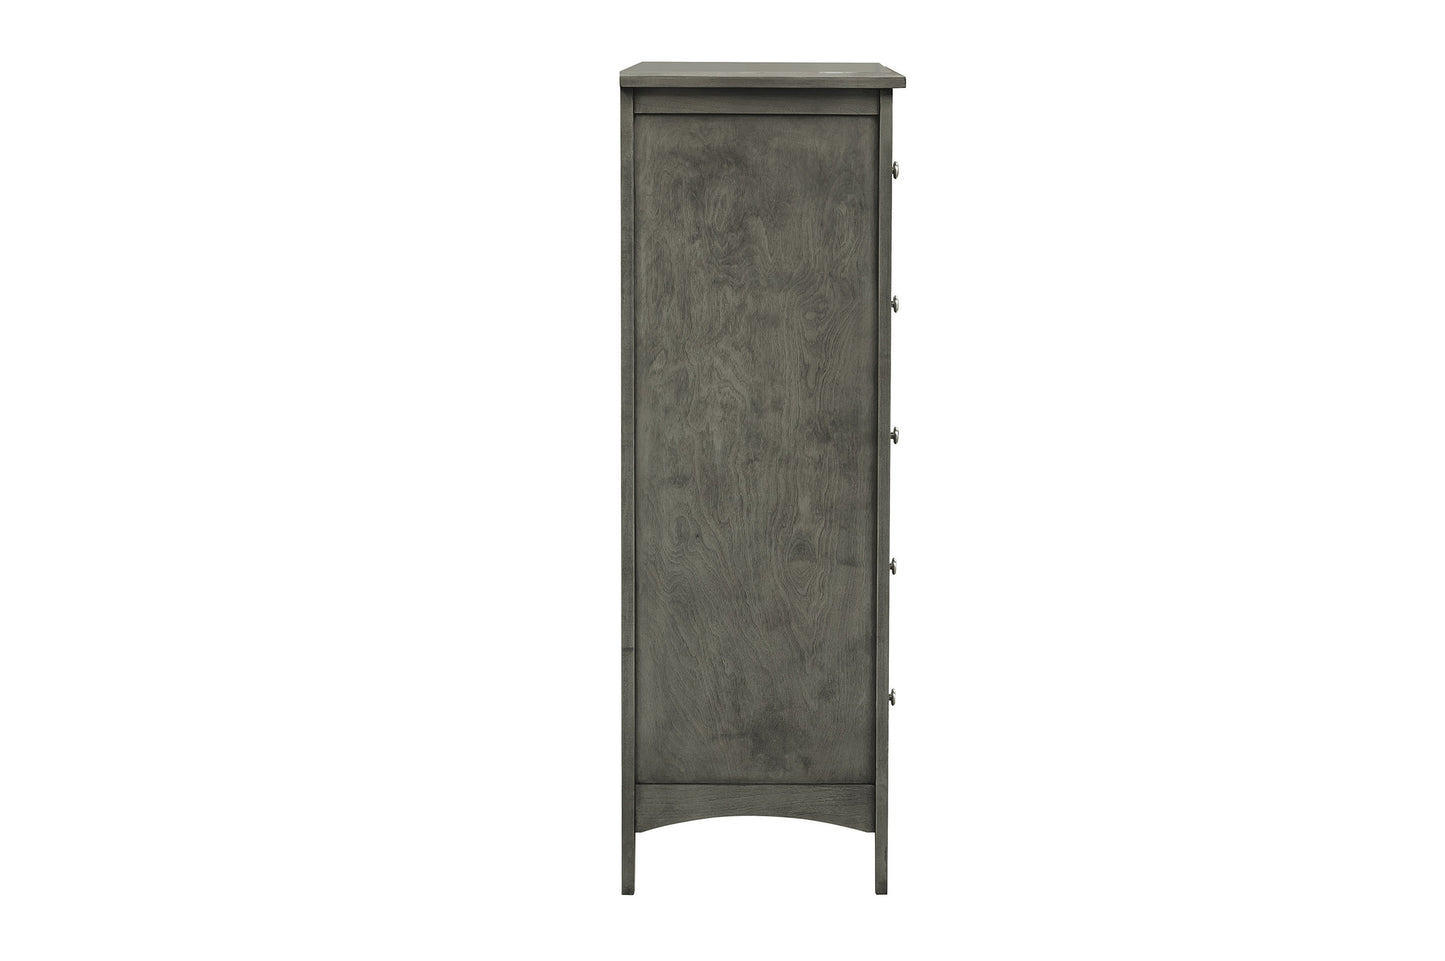 Homlegance Chest Garcia Collection In Gray Finish